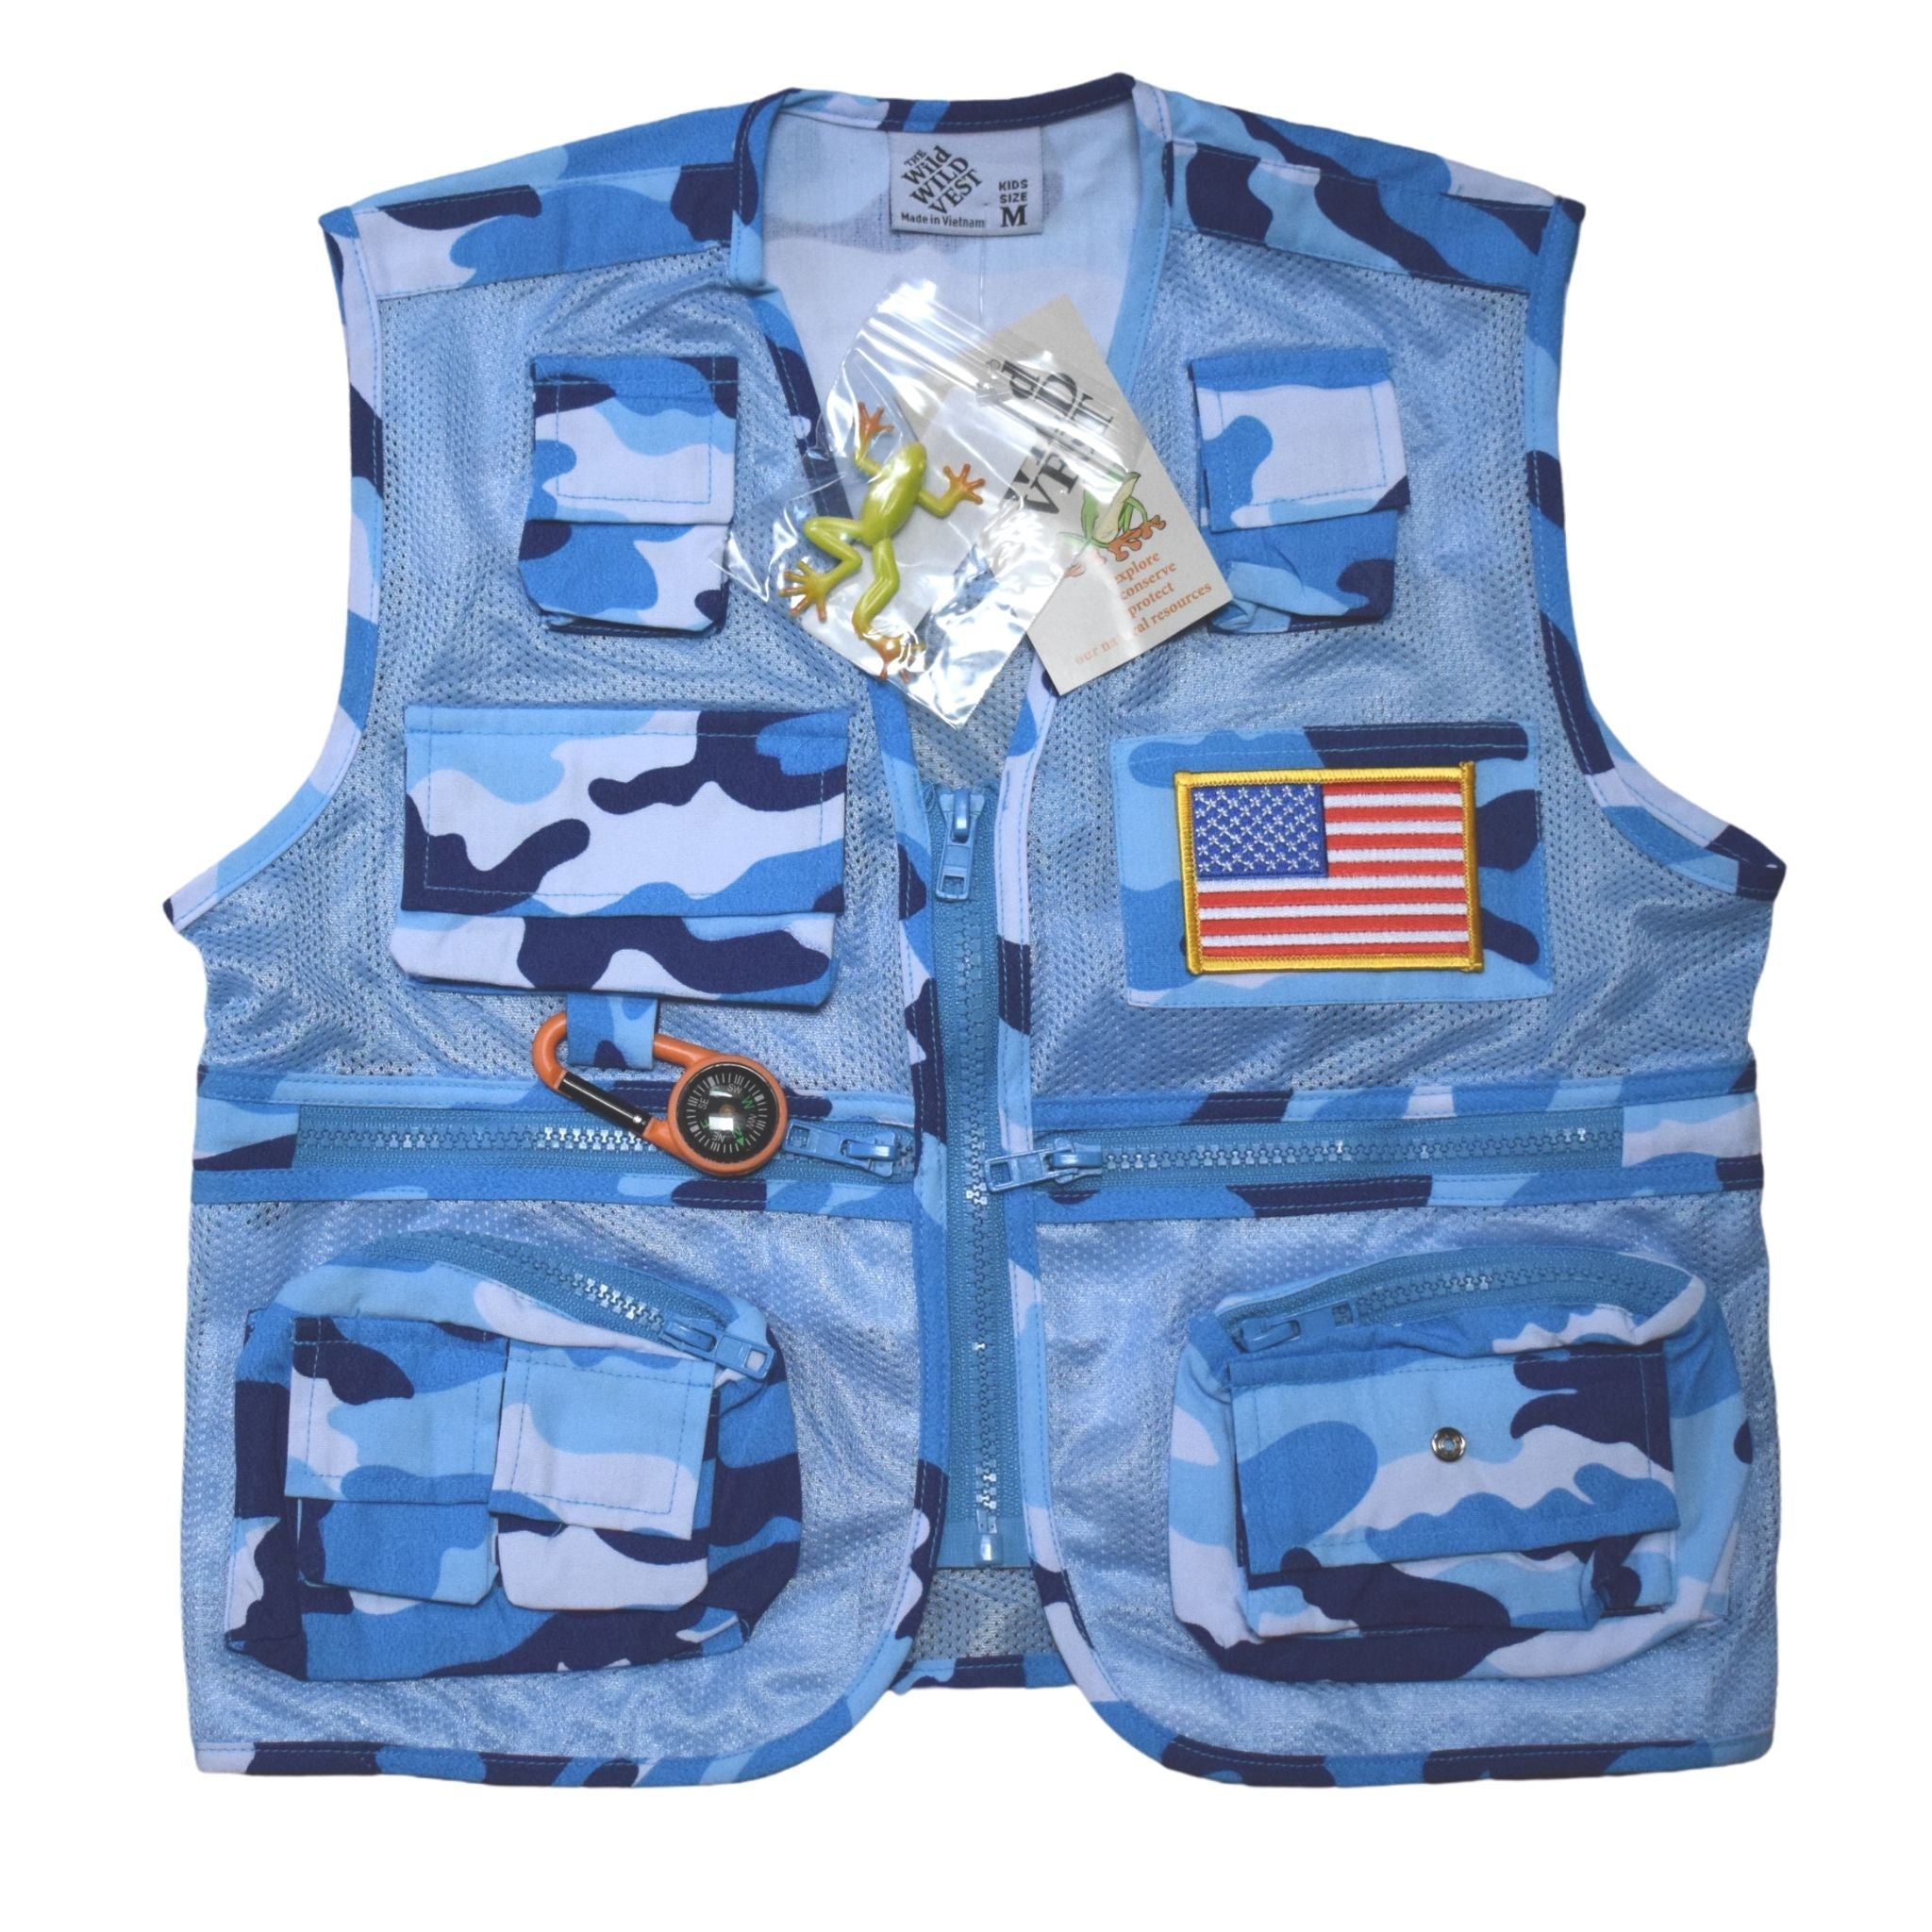 Adventure Vest - Blue Camo with American Flag M (Youth 5-6)